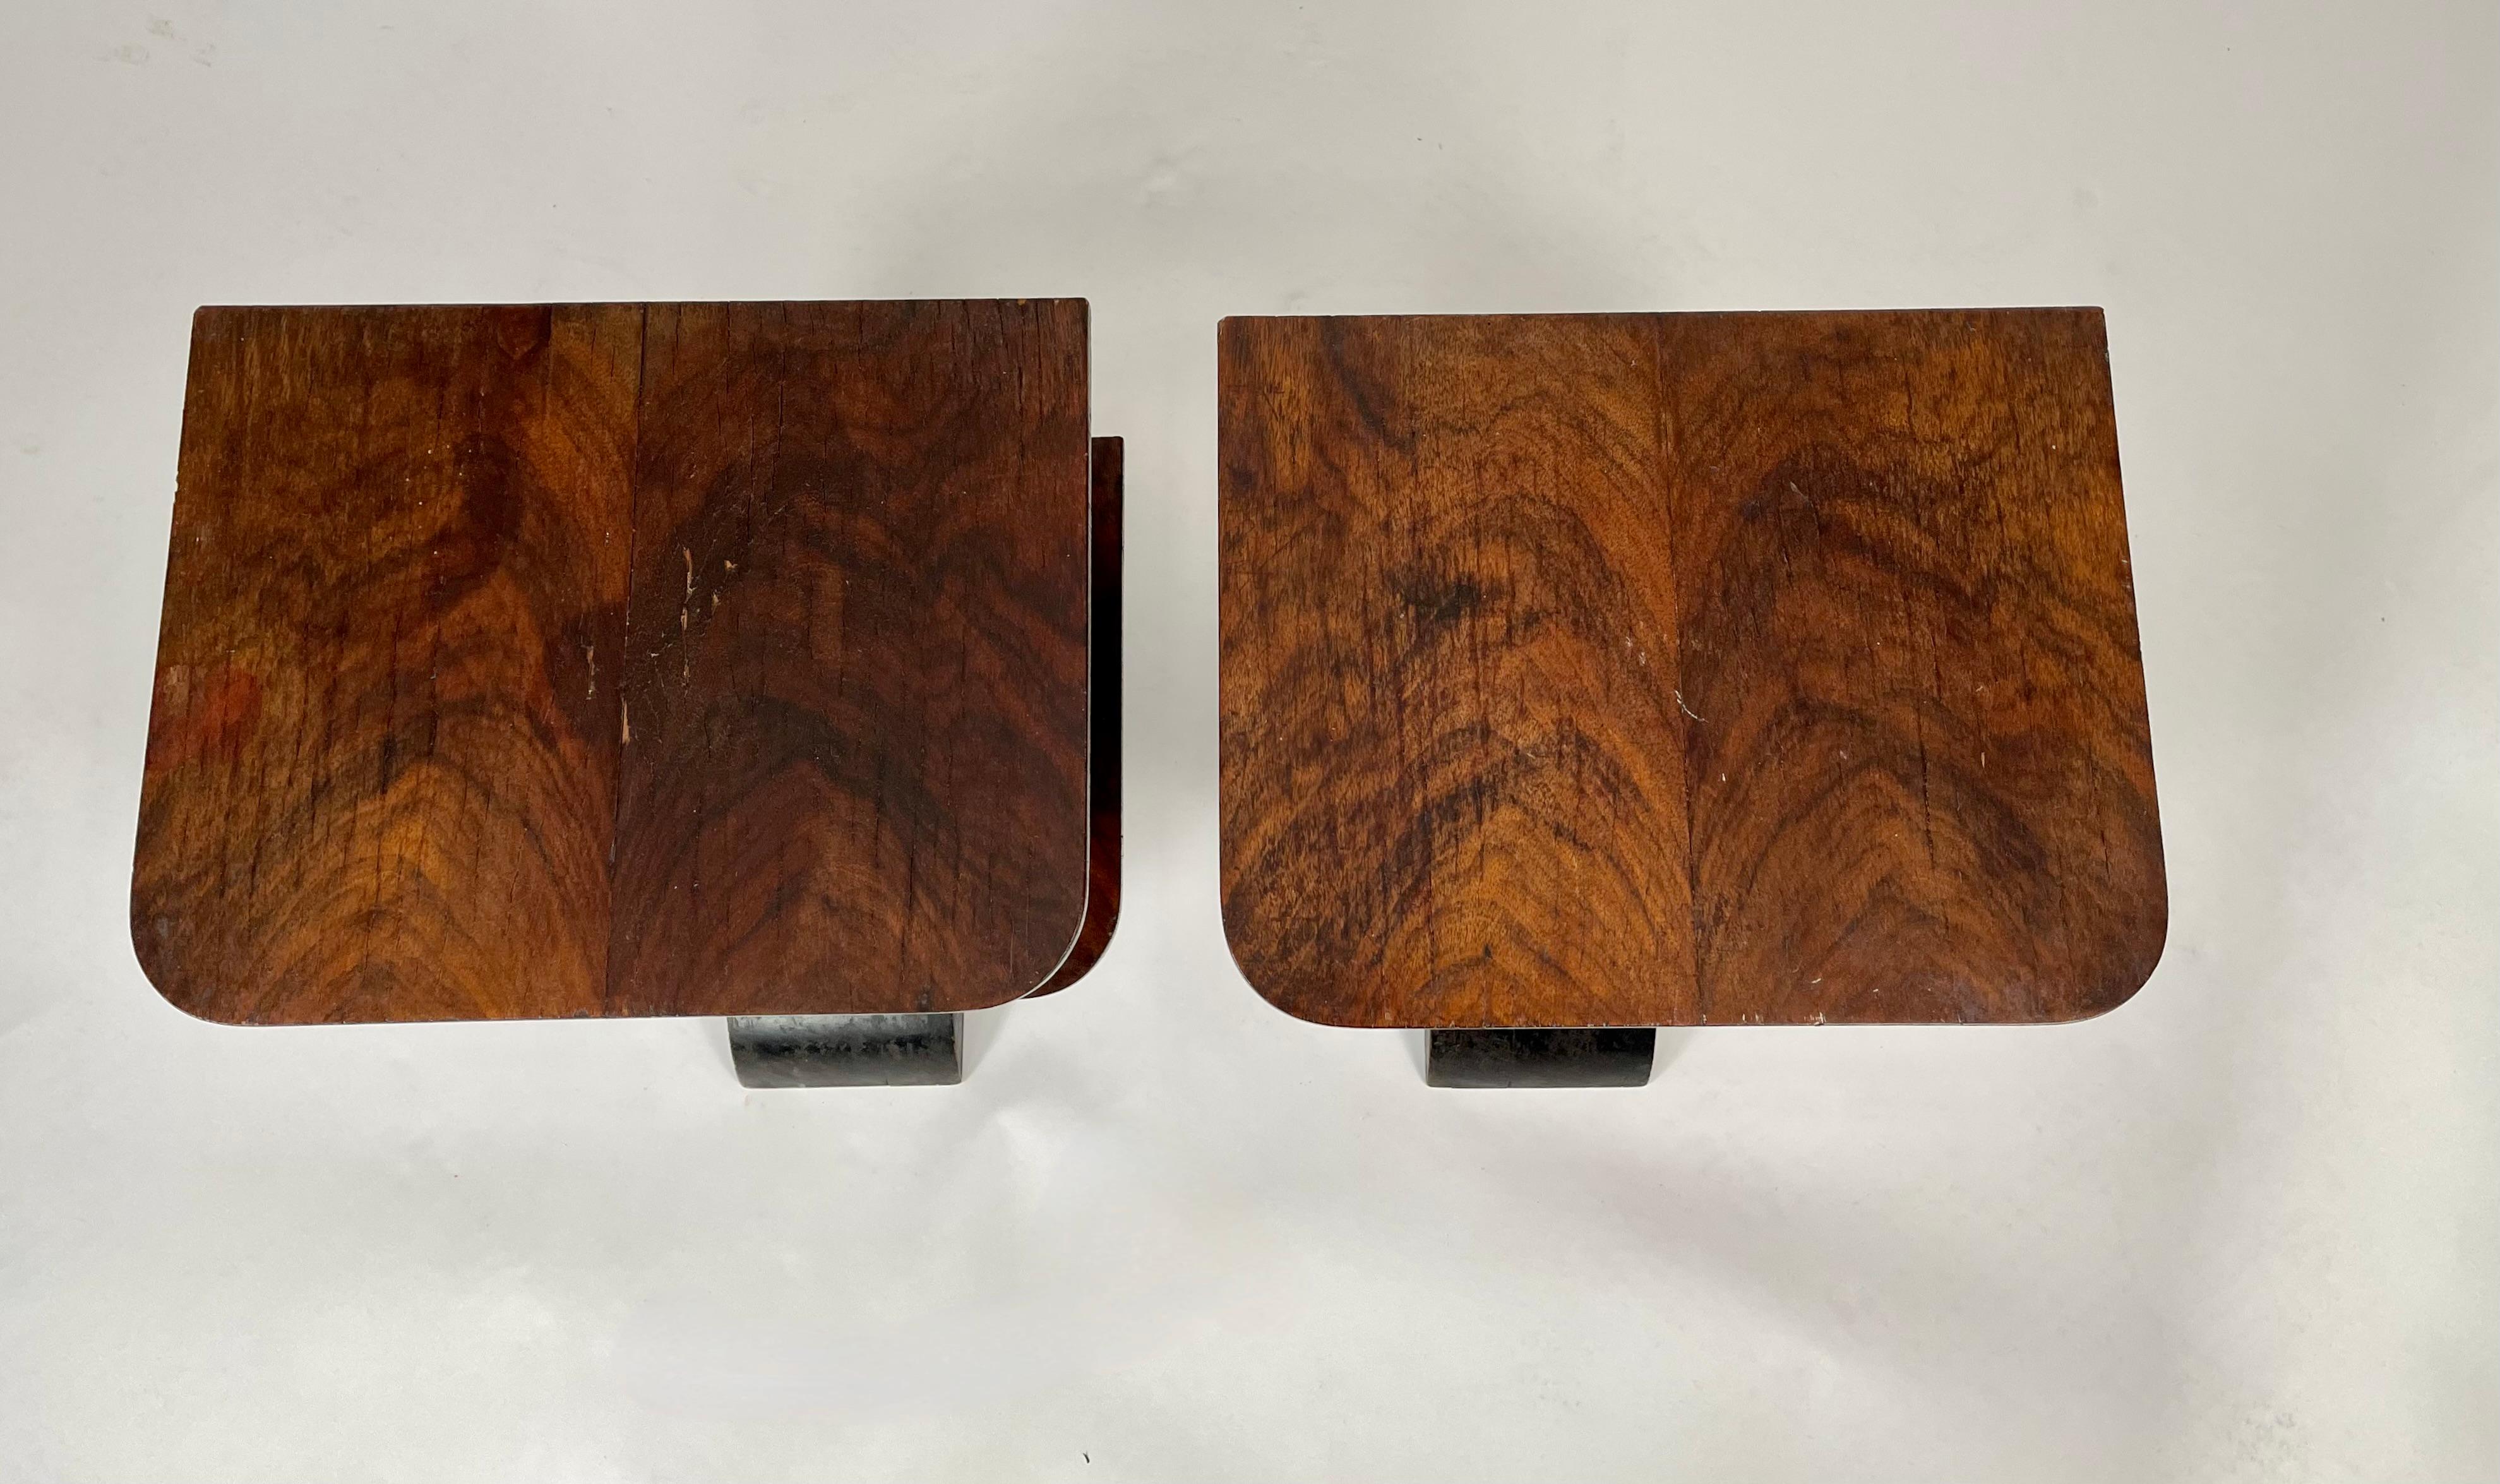 Pair of Small Art Deco End Tables with Shelves 1